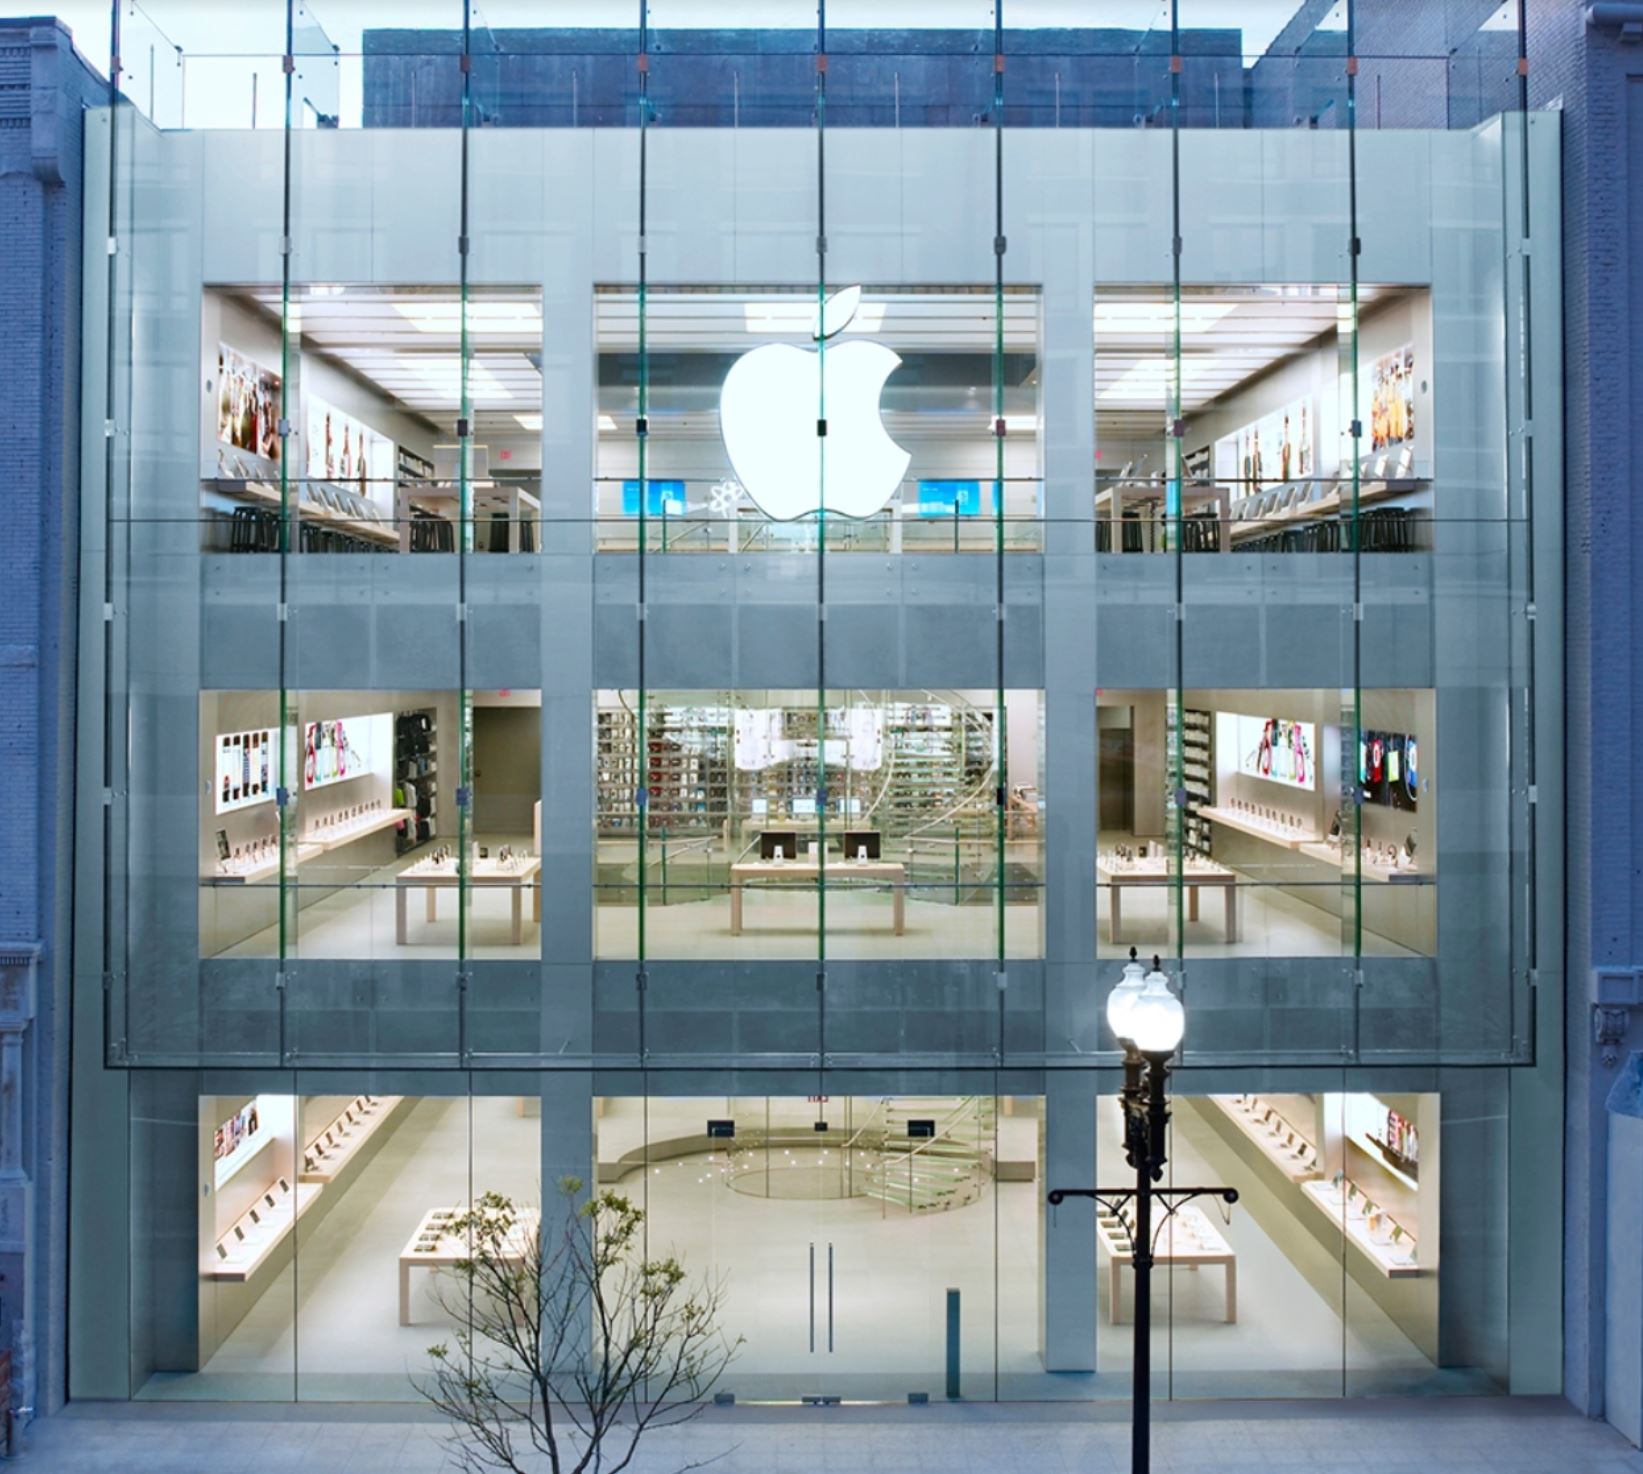 Most Stunning Apple Stores Around The World - MacTrast